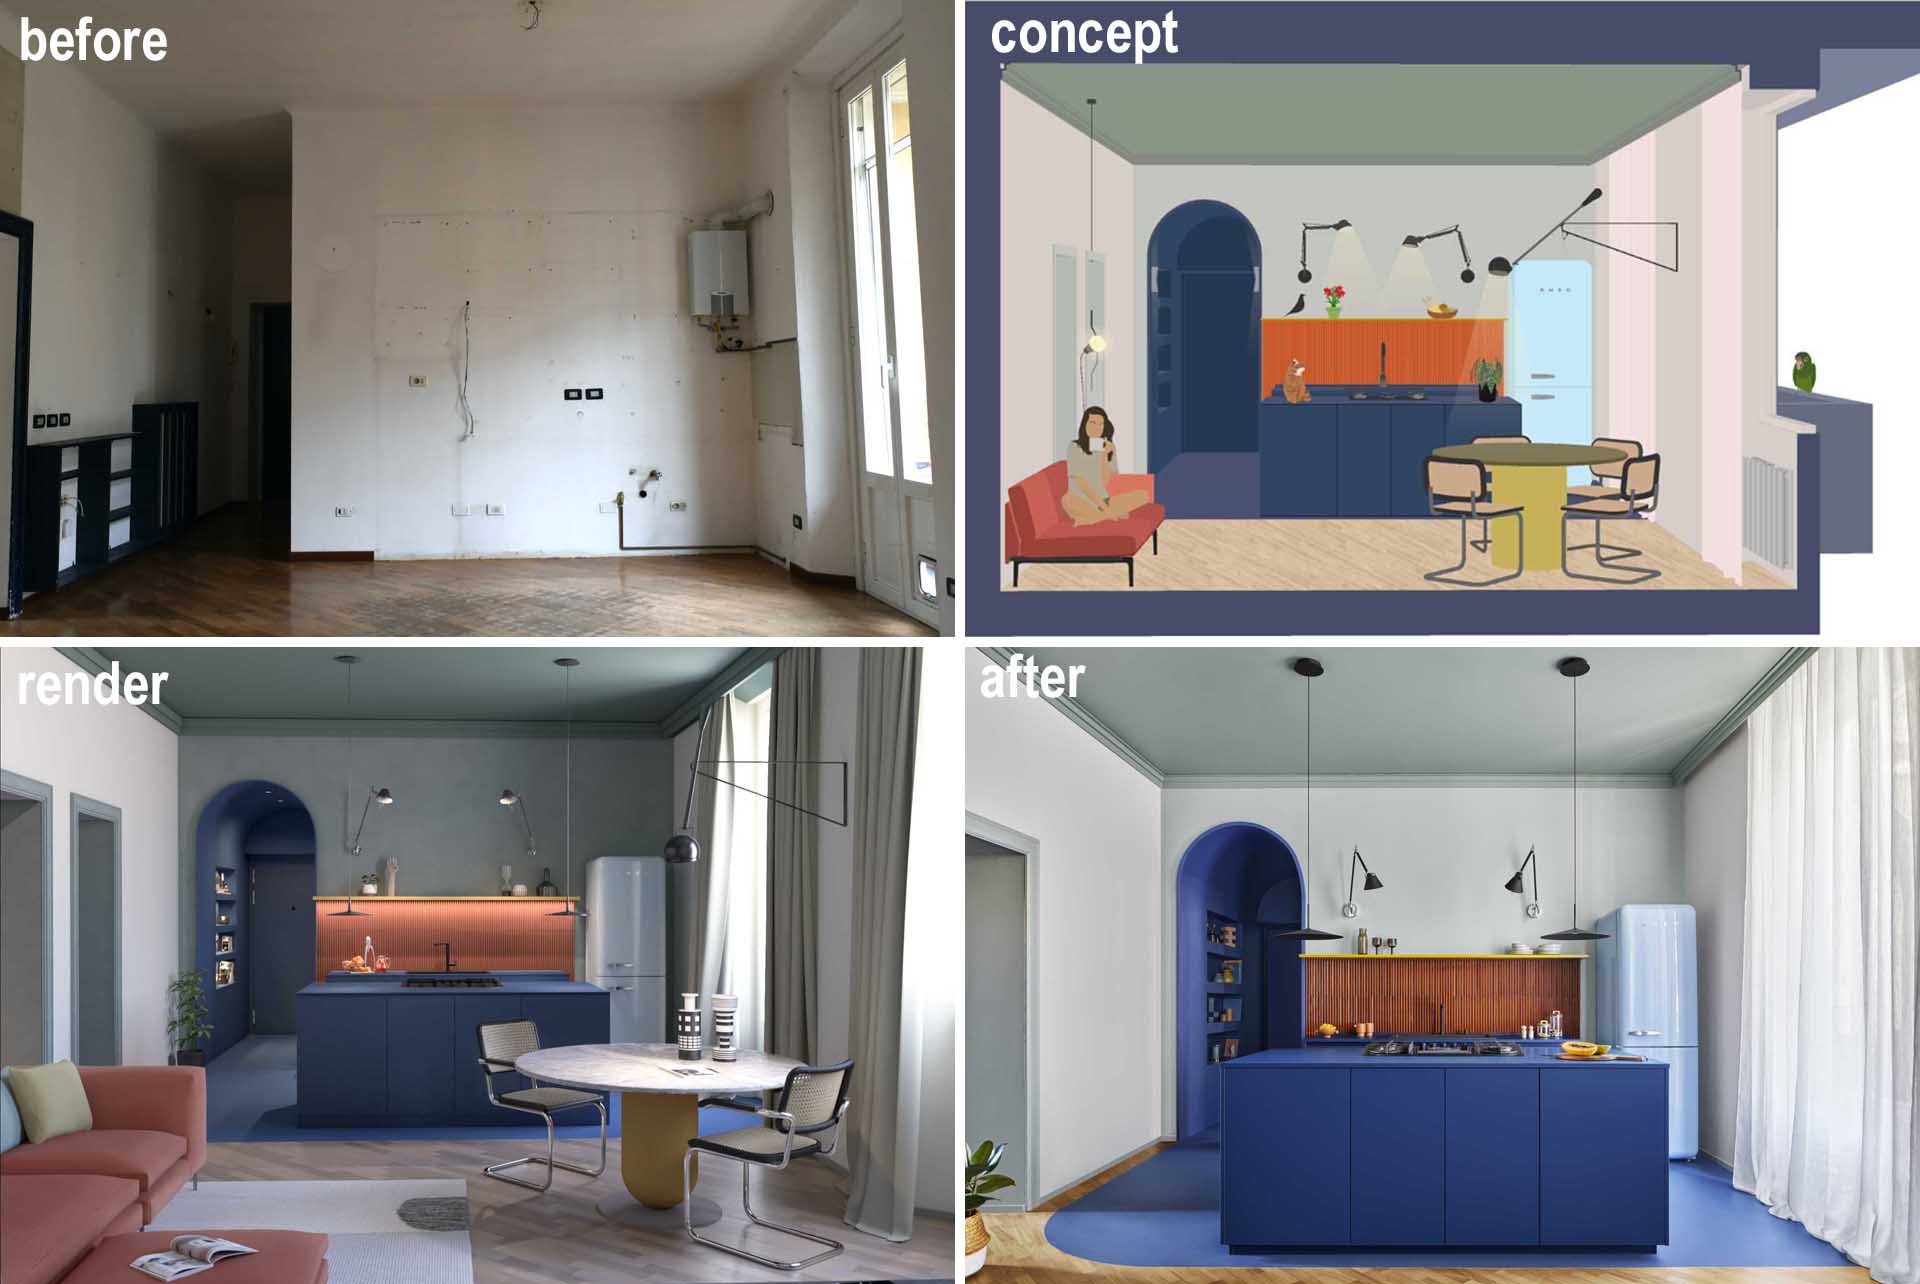 The transformation of an apartment from the 'before', to the concept stage, renderings, and final photos.